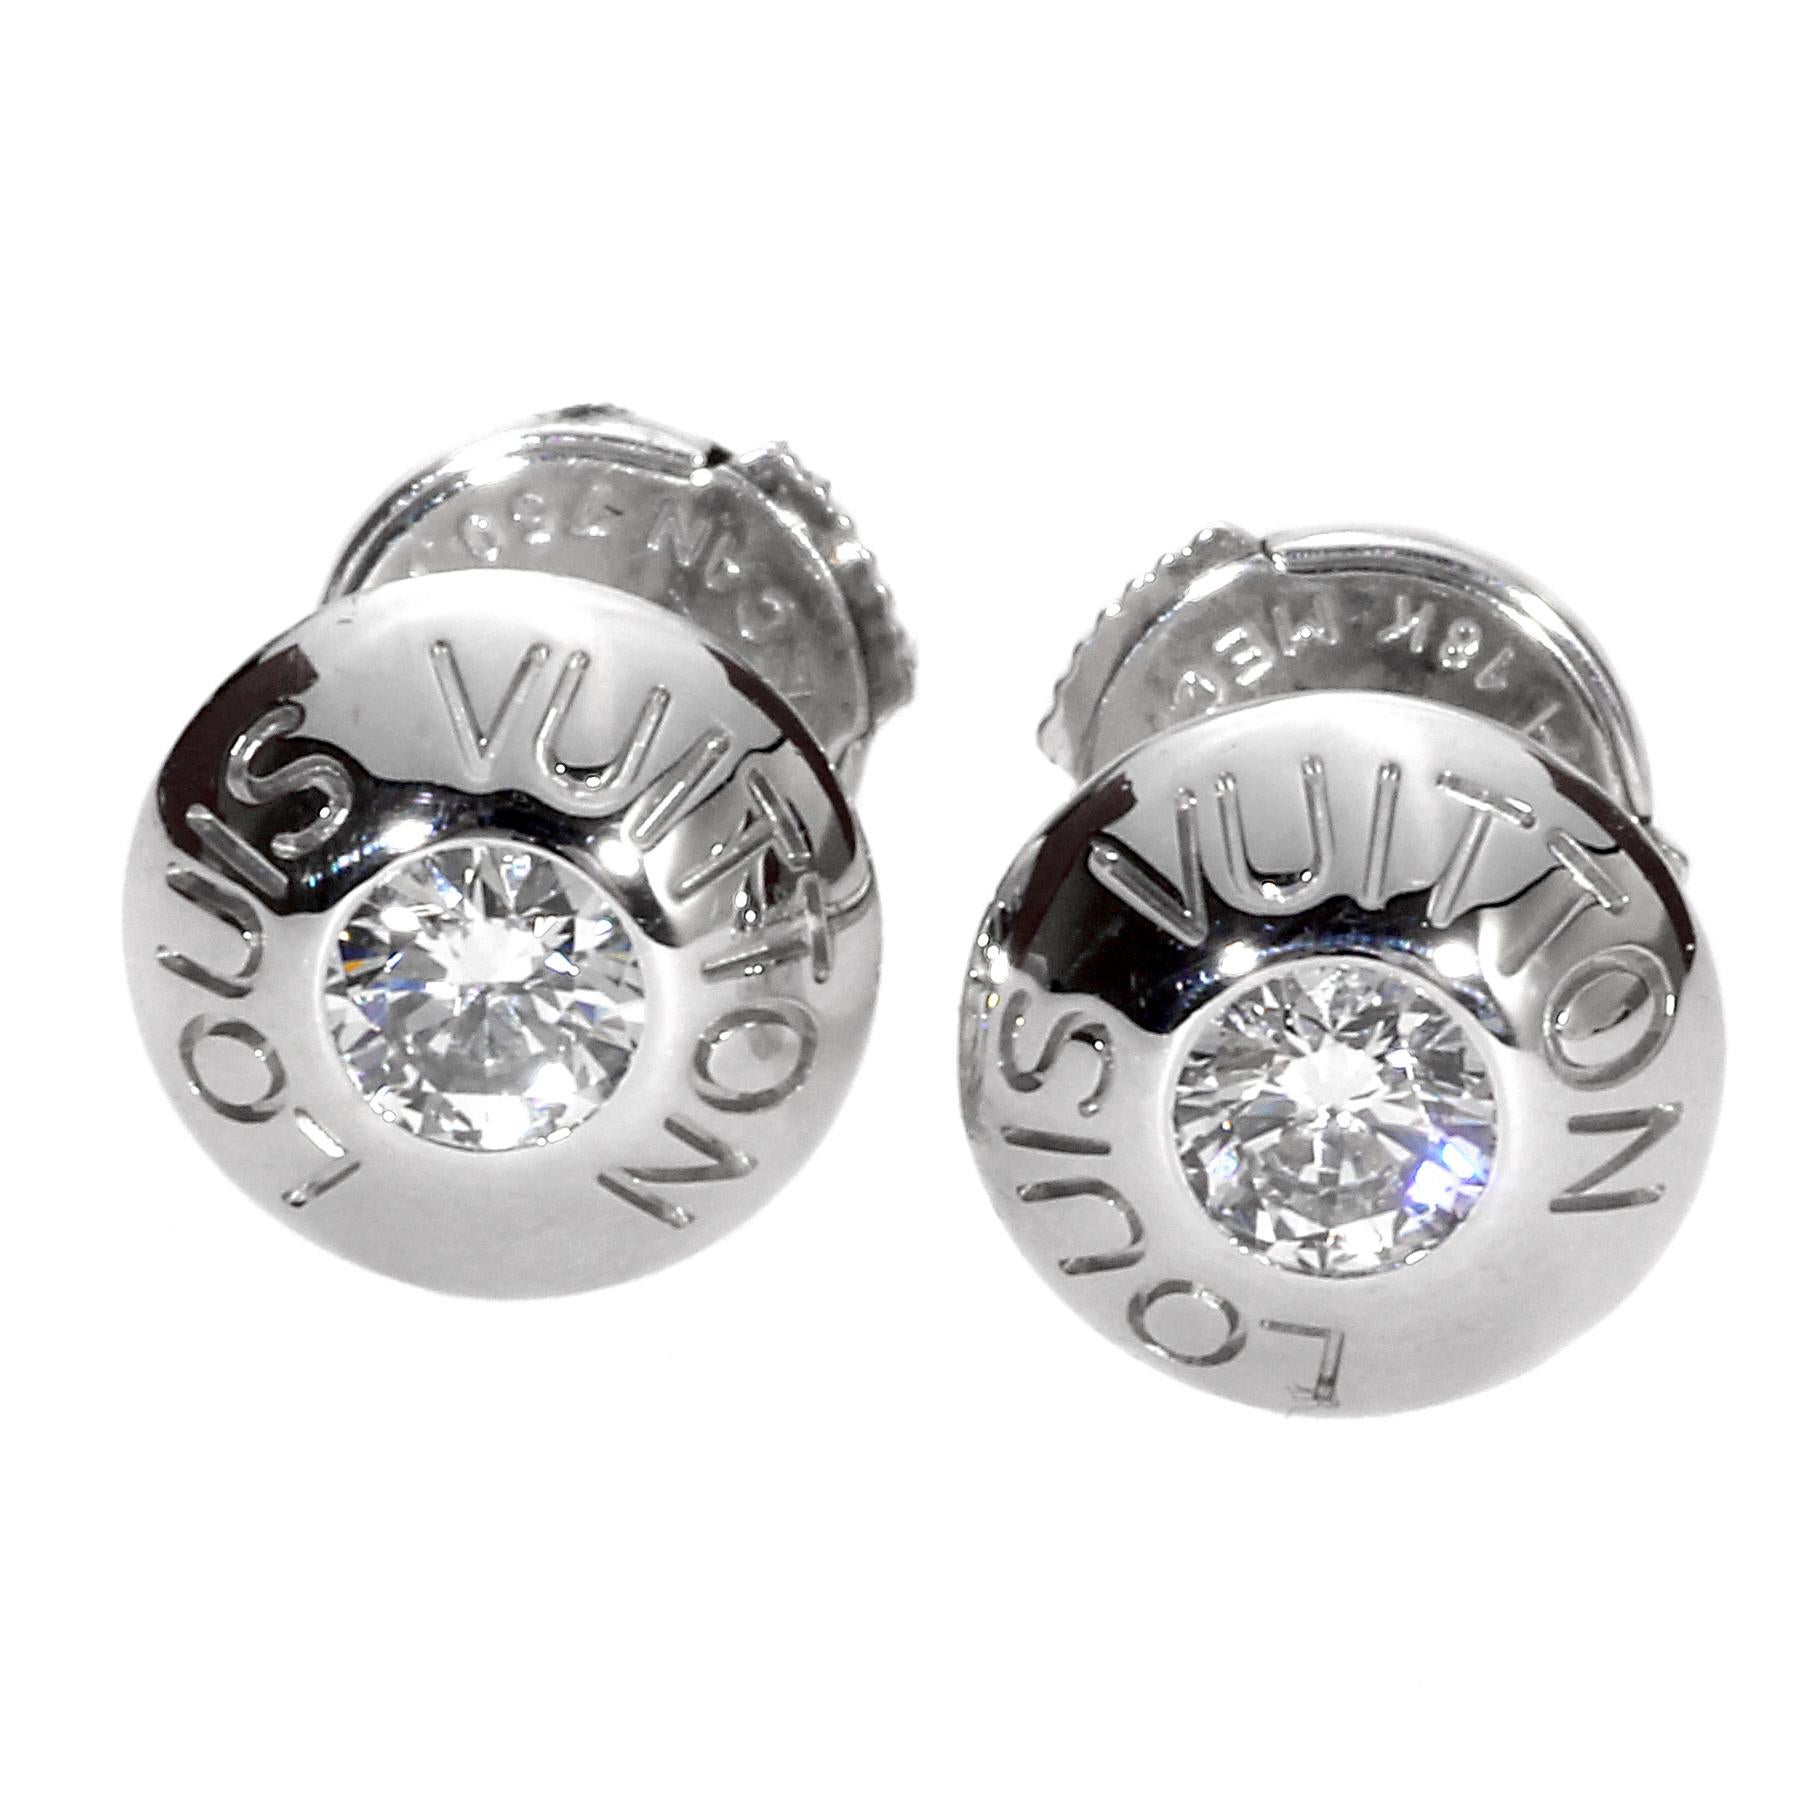 A very chic pair of authentic Louis Vuitton earrings exquisitely crafted in diamonds and white gold. These lovely Louis Vuitton earrings are a real treasure! They have a total of .30 carats of diamonds and are engraved with the Louis Vuitton logo in